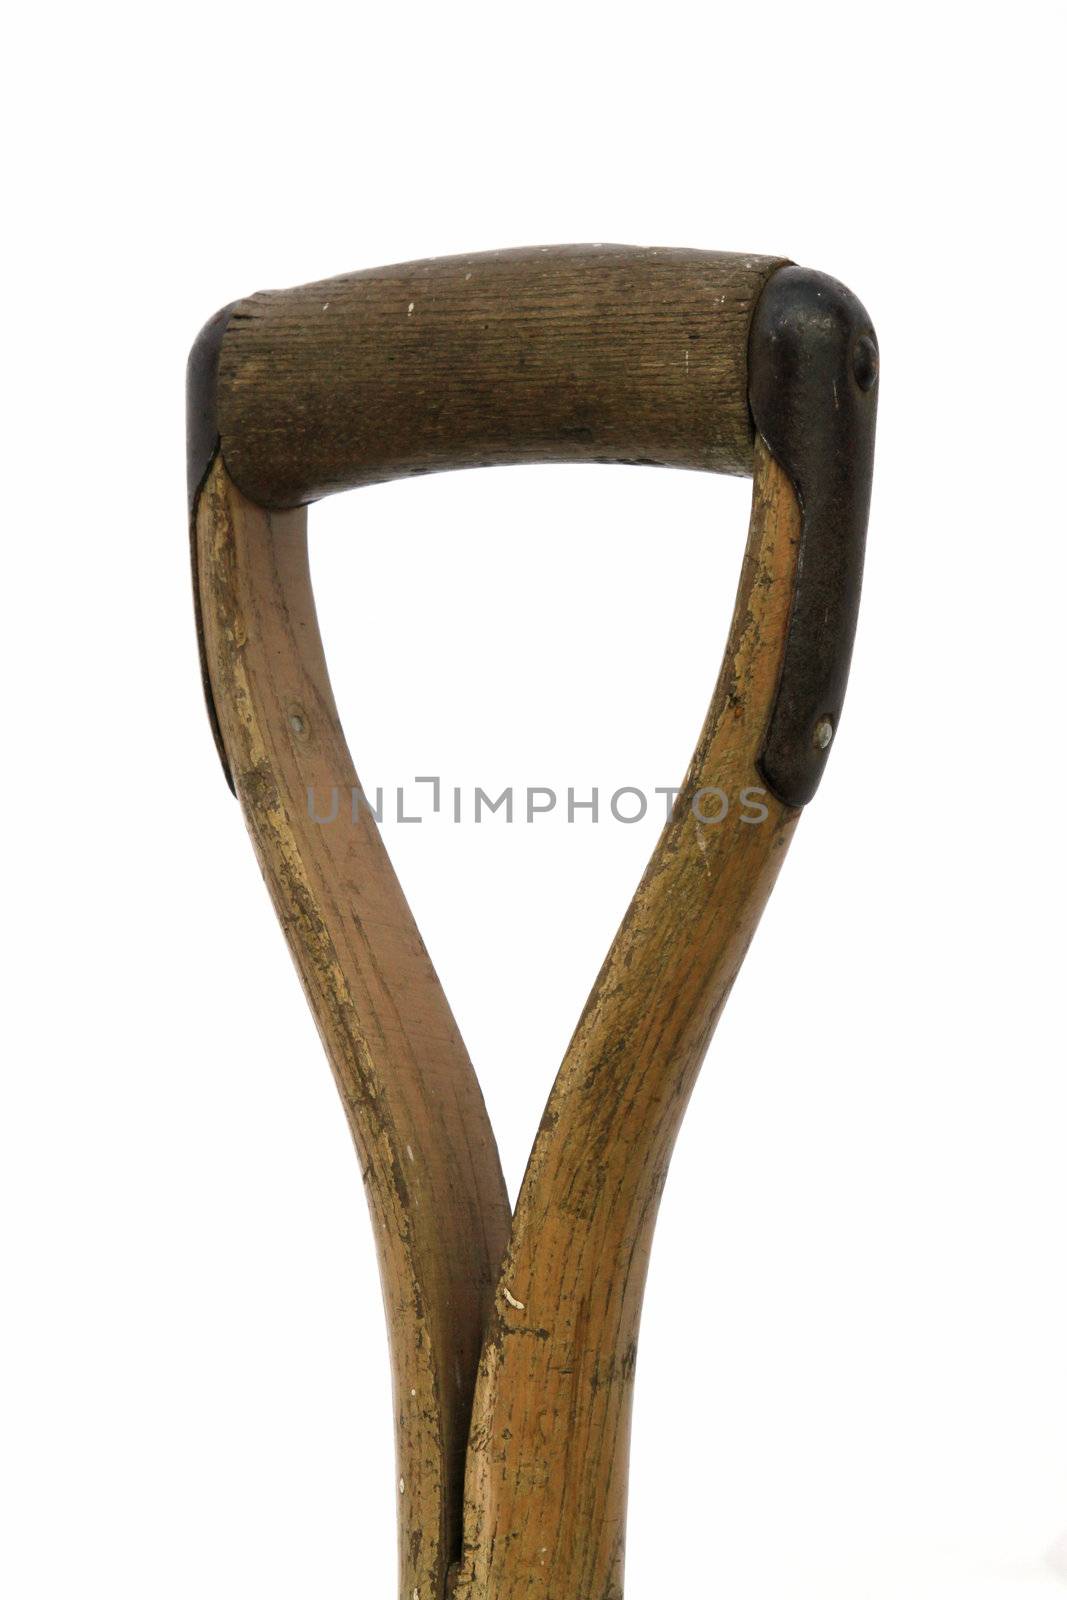 Wooden spade or fork  handle on a white background.